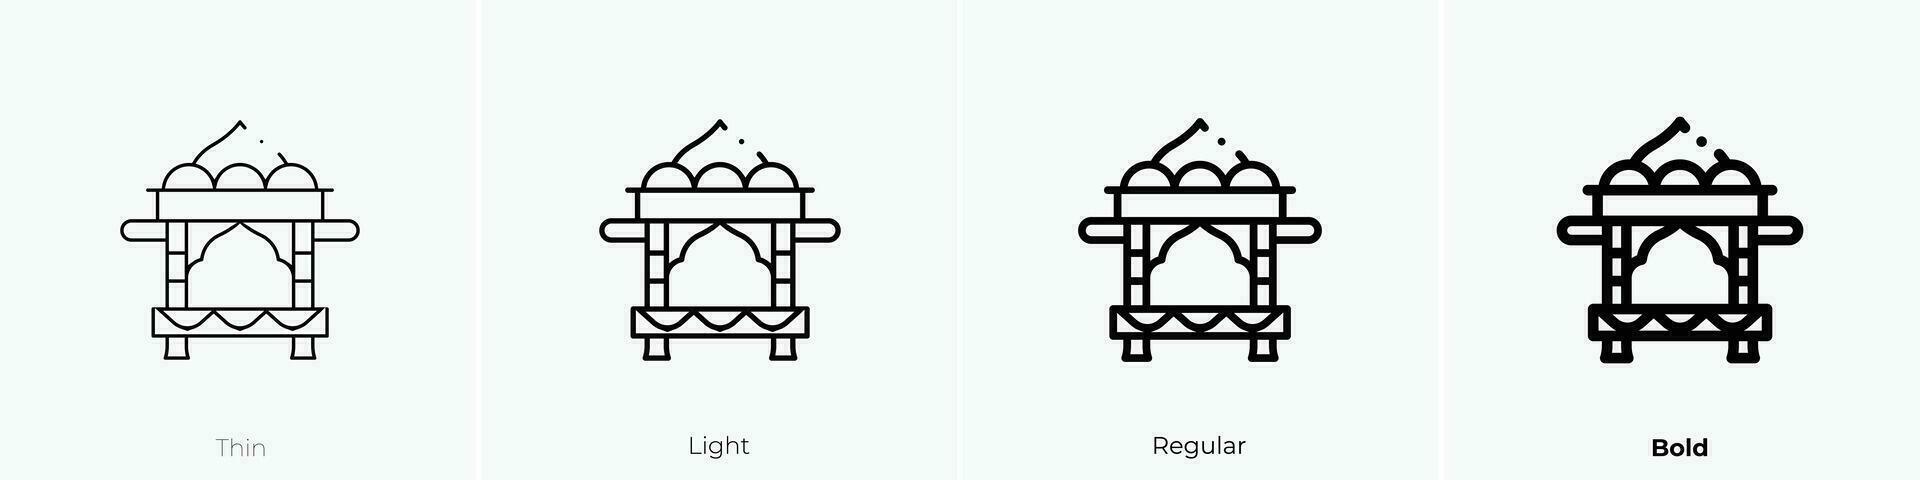 palanquin icon. Thin, Light, Regular And Bold style design isolated on white background vector